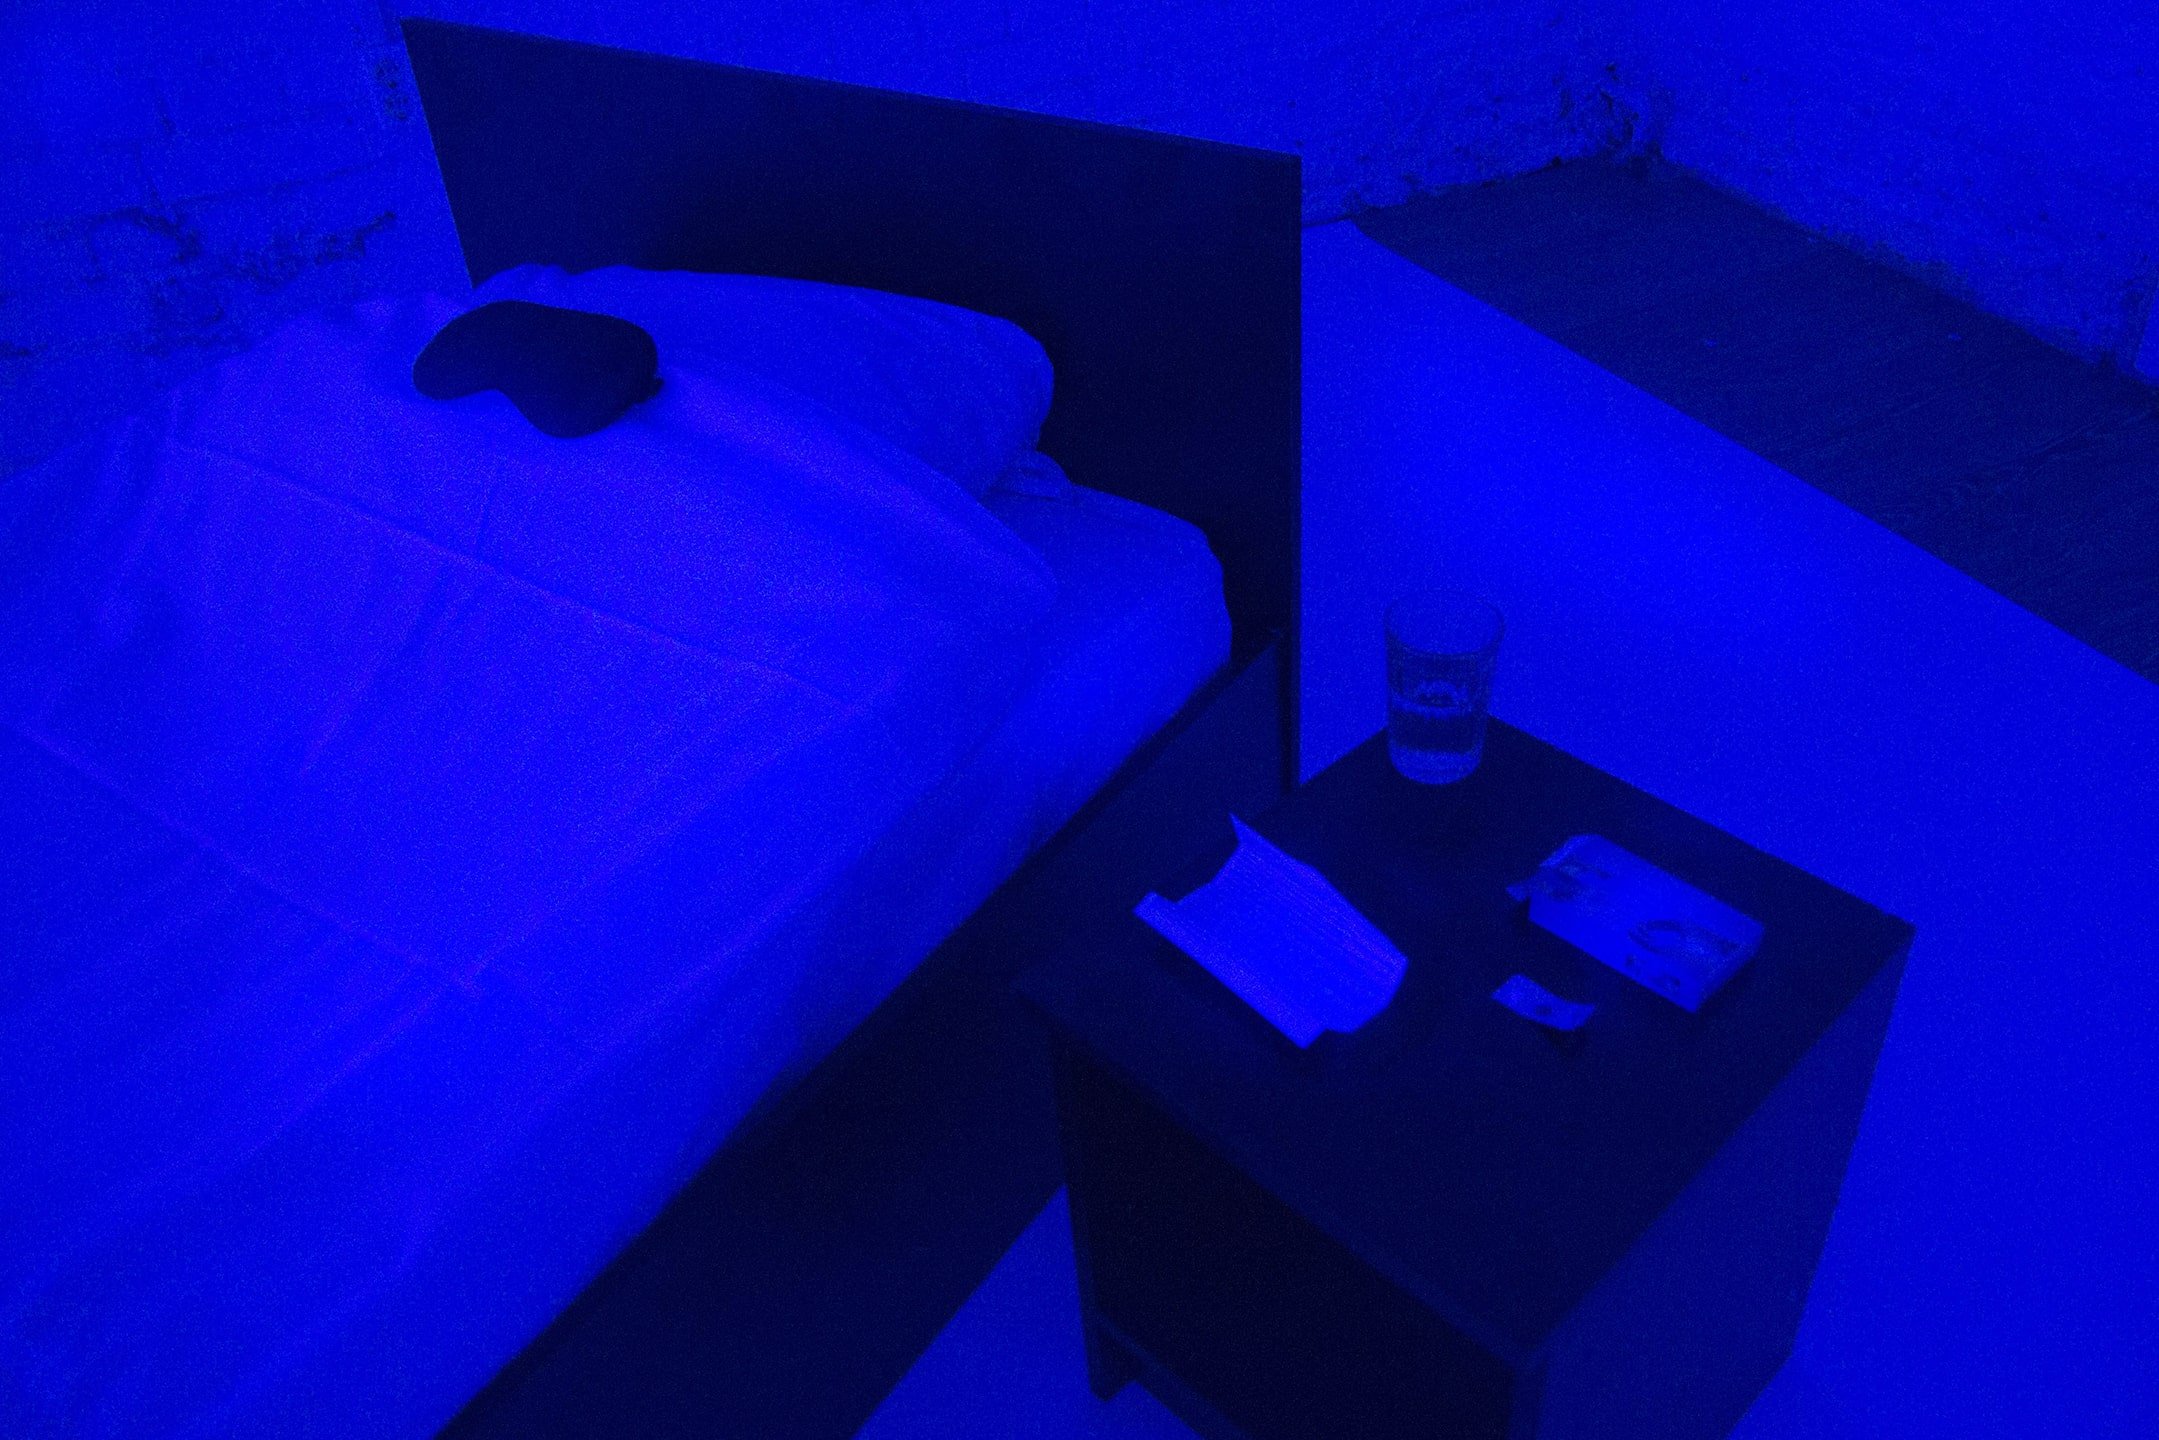 Iceberg-18010813. Blue Room, constructed situation, 2018. Visitors, who saw the invitation at the Russian equivalent of Gumtree, entered a basement room alone, where they found a bed, a sleeping pill, and a laptop with access to Dark Web